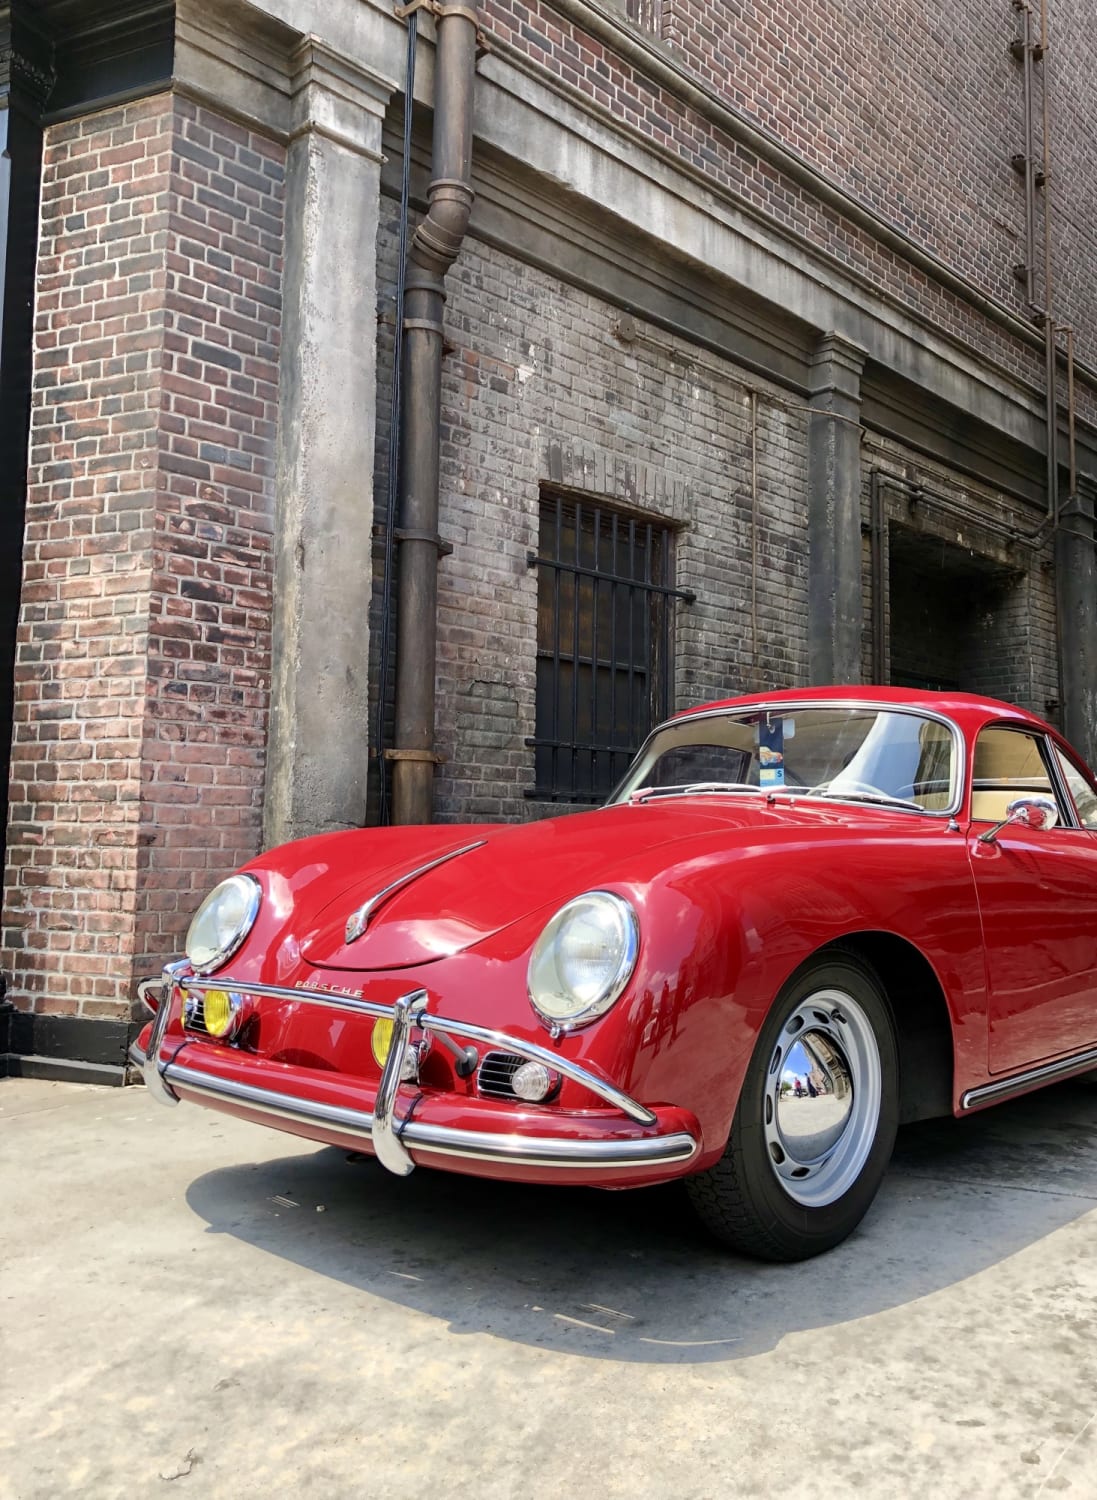 Porsche 356 peering out of an alley